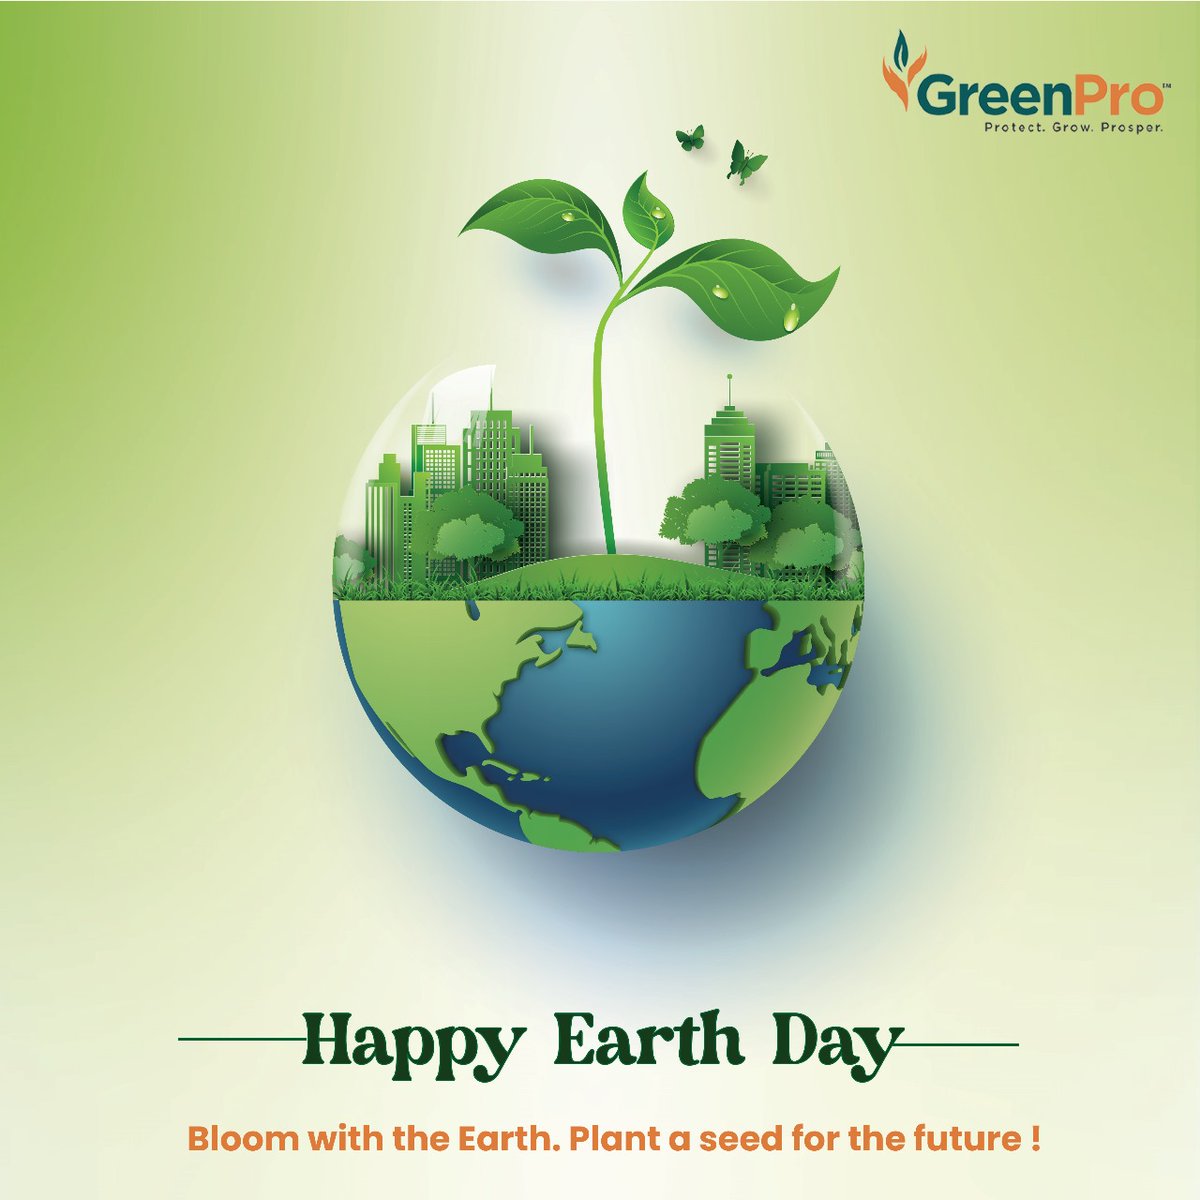 At GreenPro Ventures, we're committed to a greener tomorrow, every day. This Earth Day, let's pledge to make conscious choices for our planet.  Let's celebrate Earth Day by protecting our environment, together.

#worldearthday #earthfriendly #earthday #happyearthday #planet